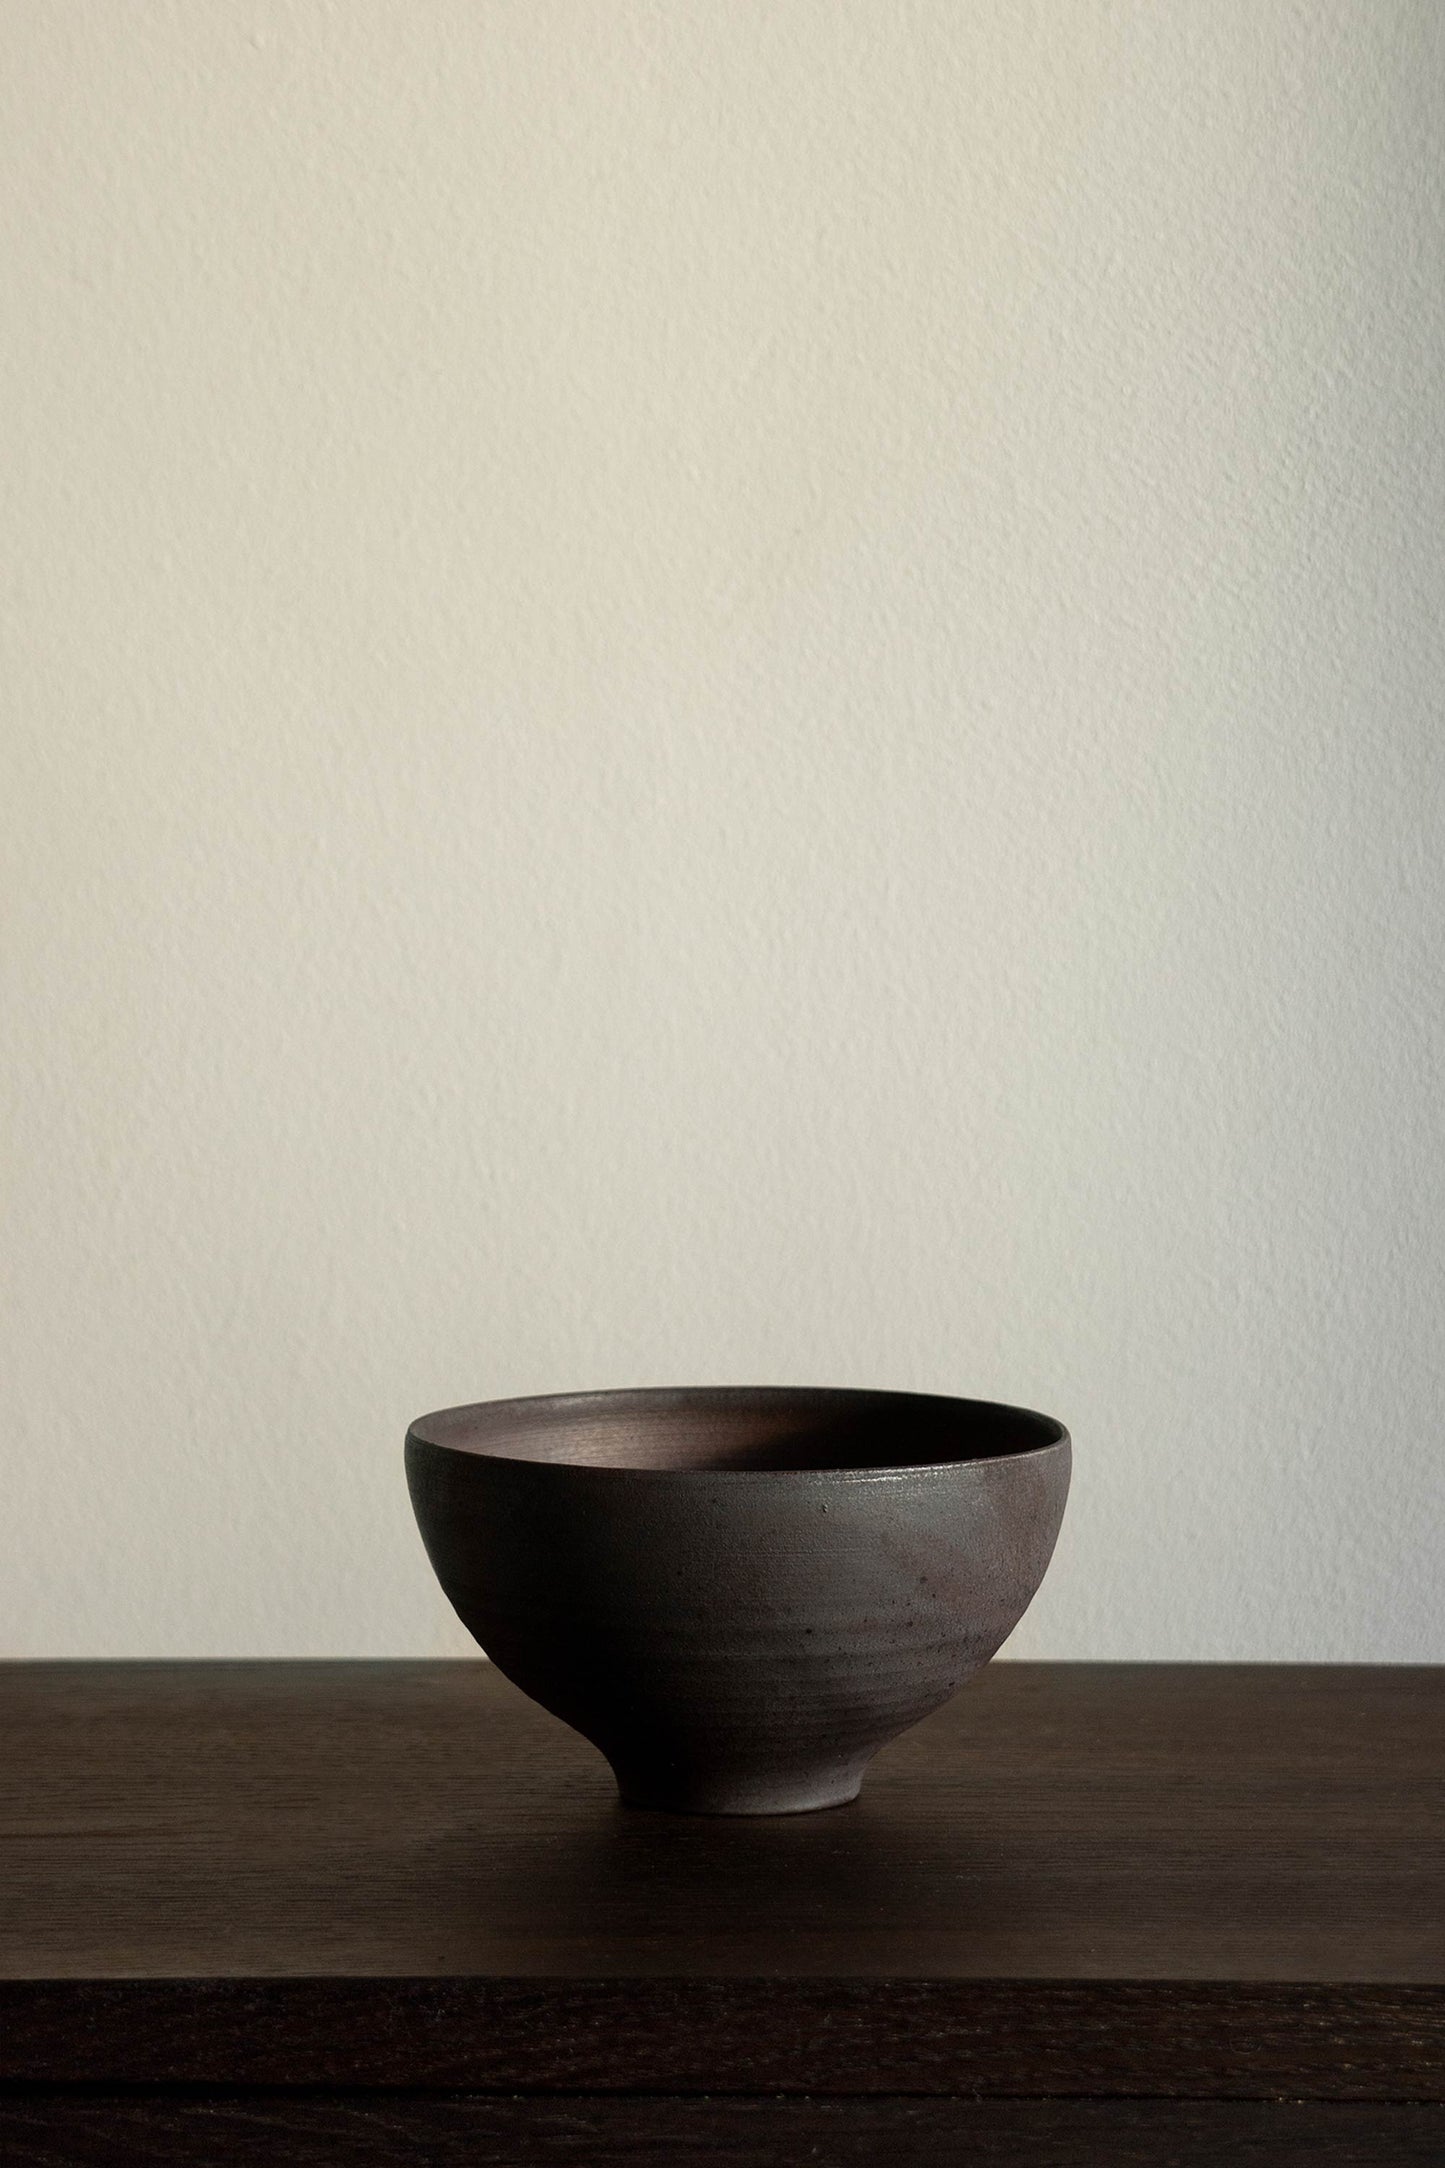 A black ceramic bowl from the brand Bonni Bonne set on a dark wooden table